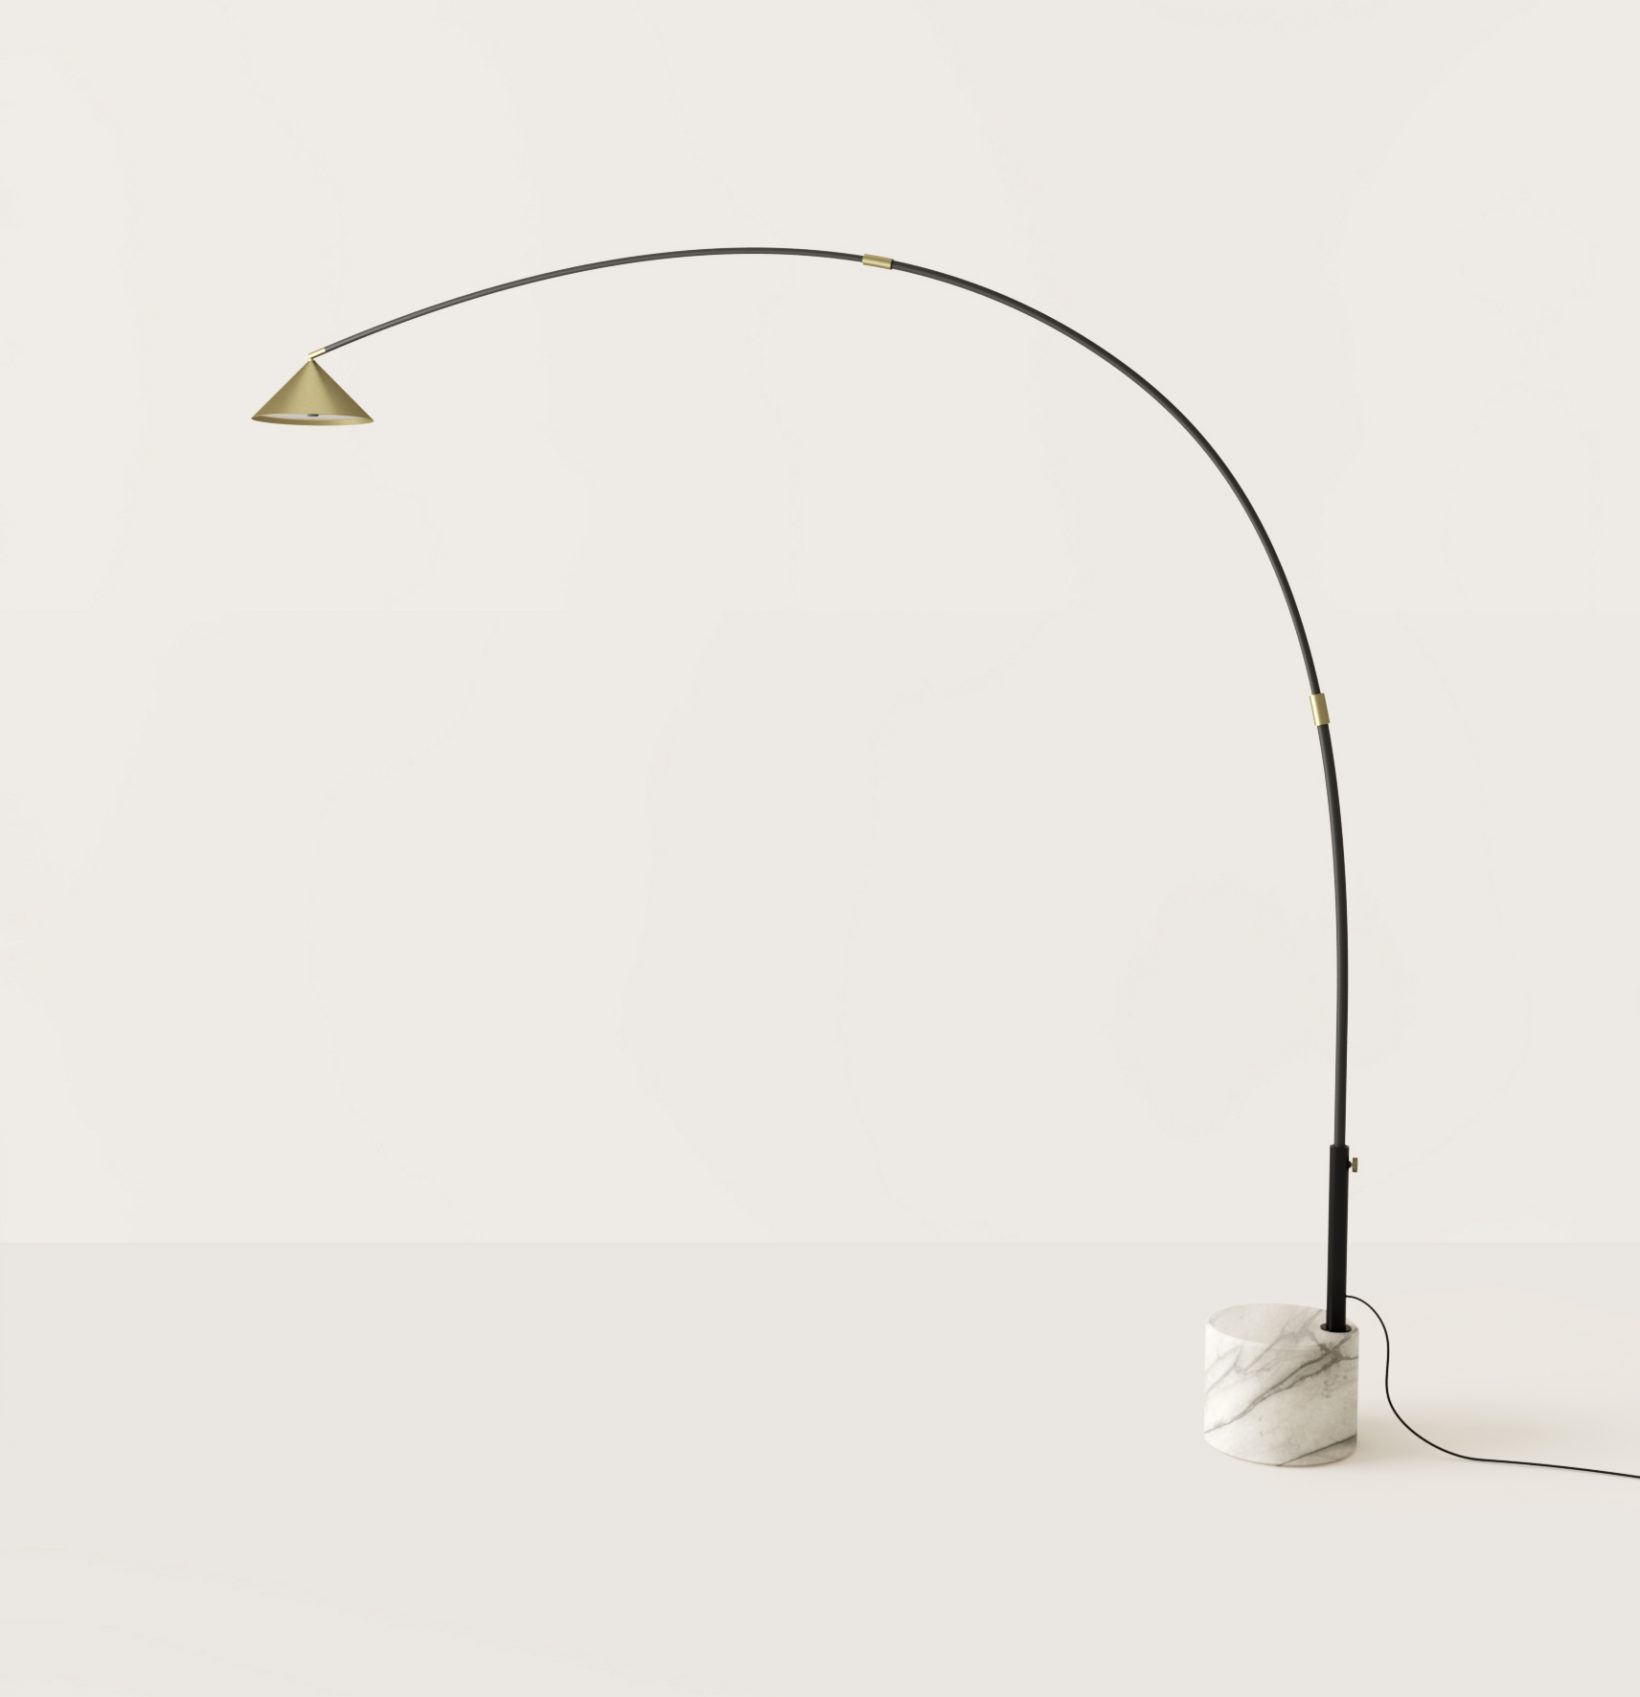 Hinoo Floor Lamp by Olson and Baker - Designer & Contemporary Sofas, Furniture - Olson and Baker showcases original designs from authentic, designer brands. Buy contemporary furniture, lighting, storage, sofas & chairs at Olson + Baker.